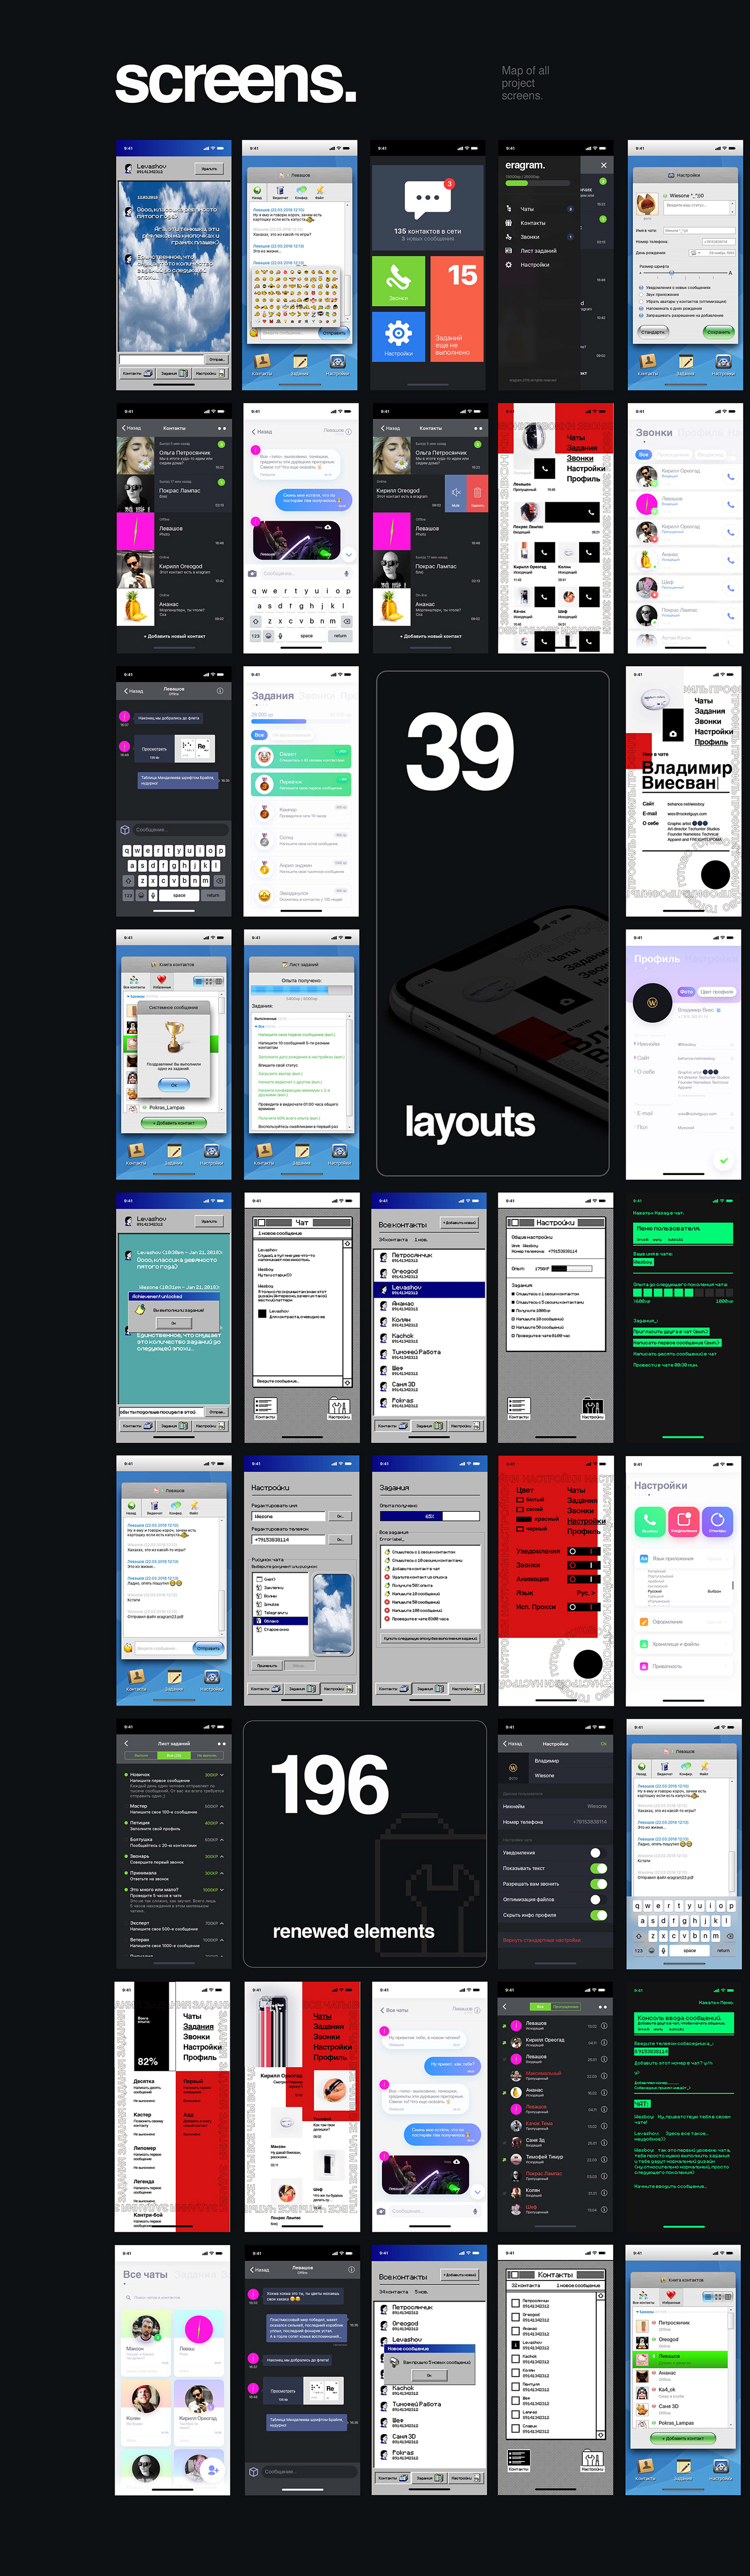 UI game poster messenger ux typo trends